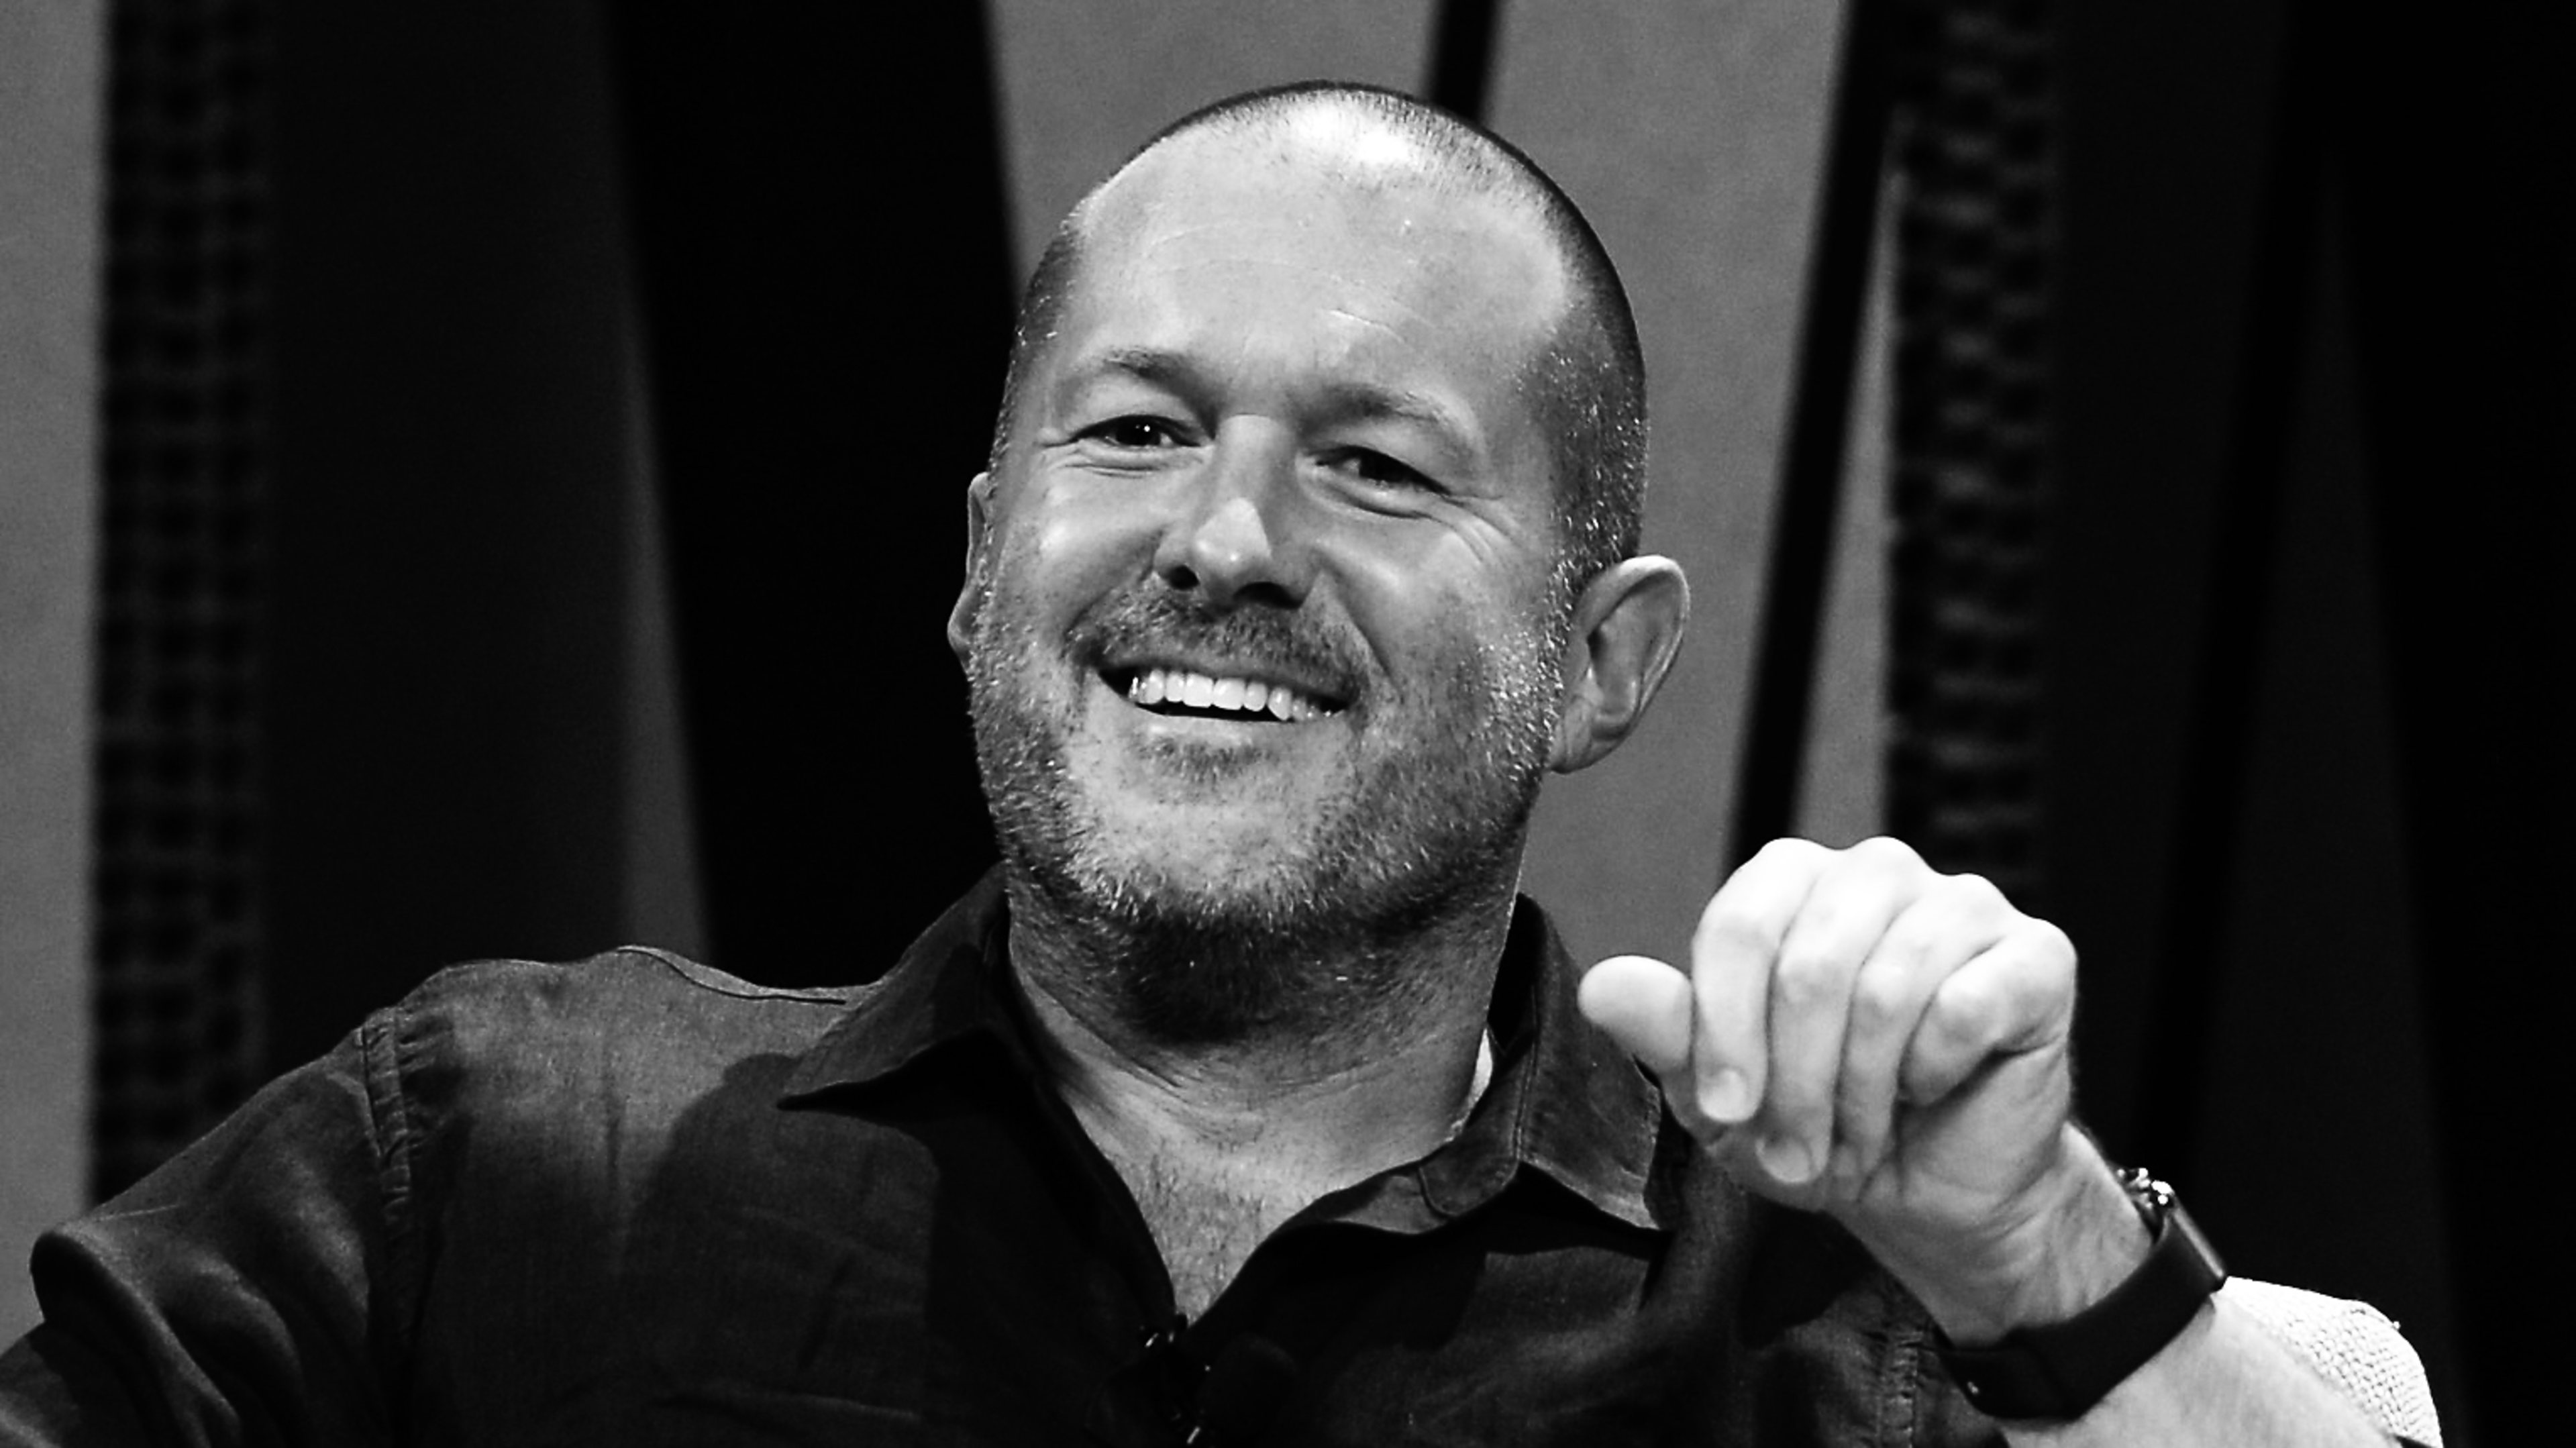 Jony Ive’s real legacy, according to Apple designers who worked with him